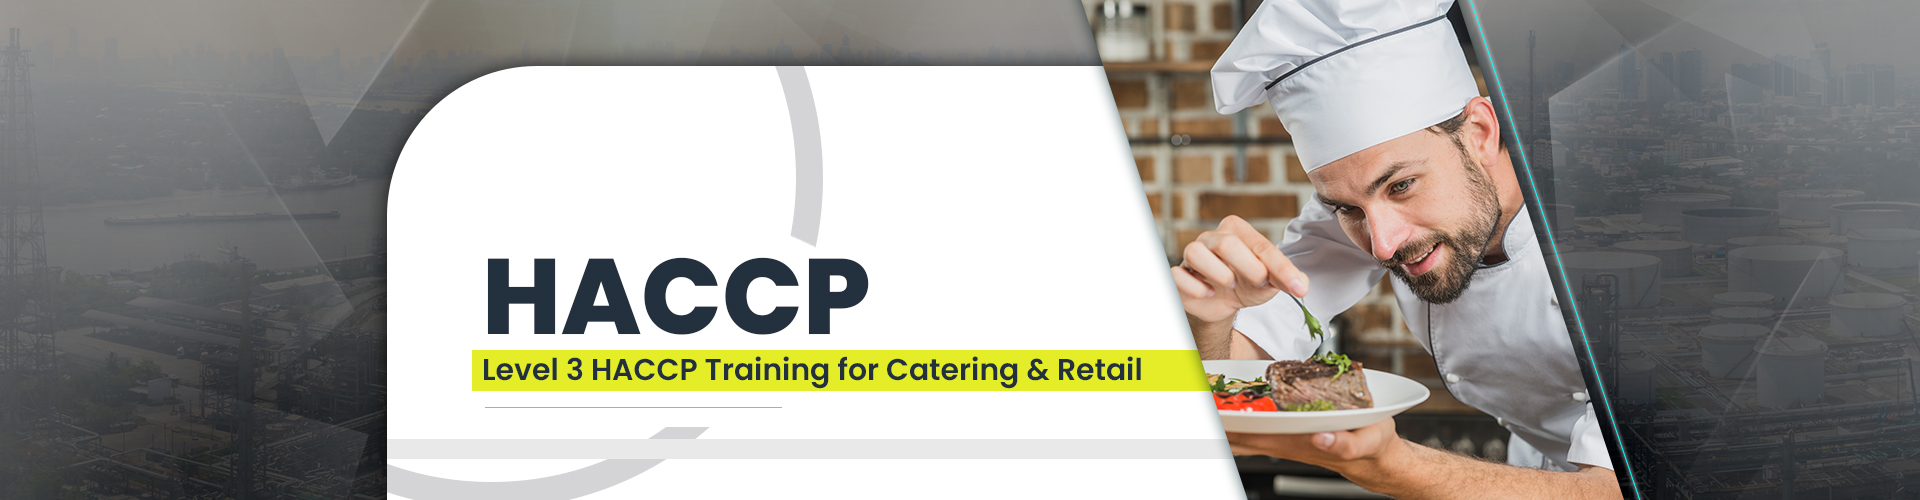 Level 3 HACCP Training for Catering & Retail